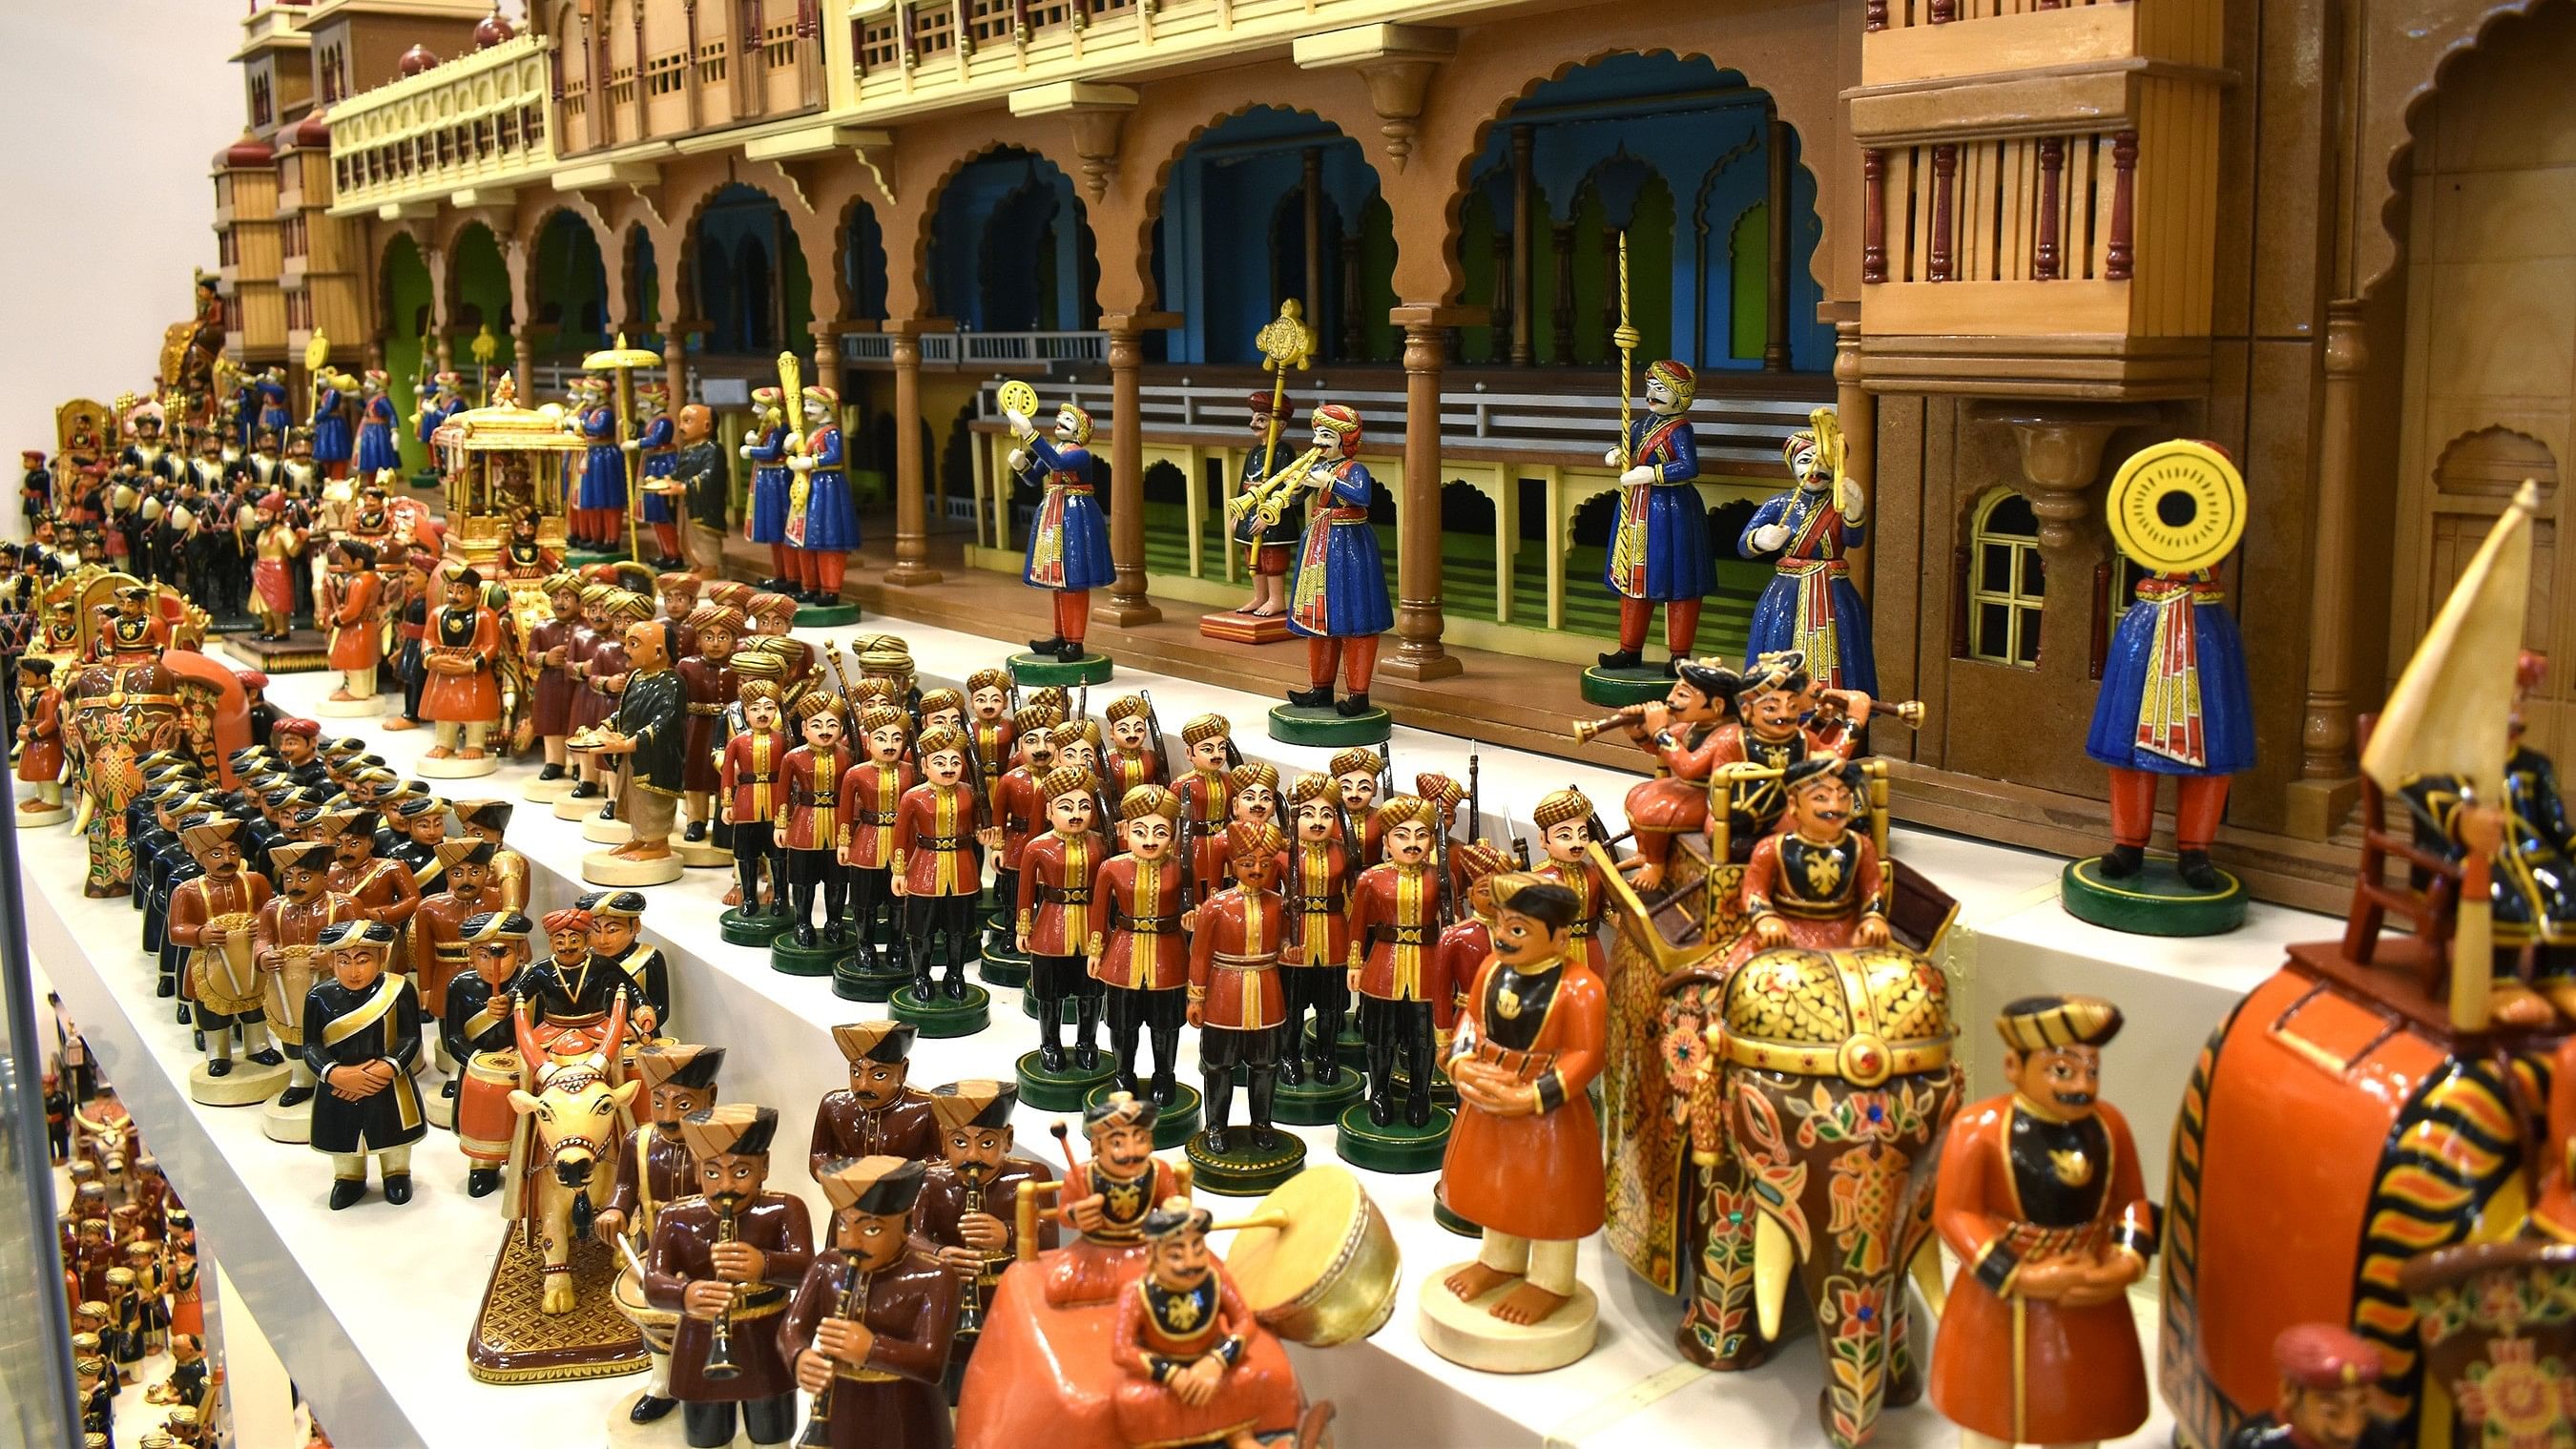 One of the displays at the museum depicts a Dasara procession.